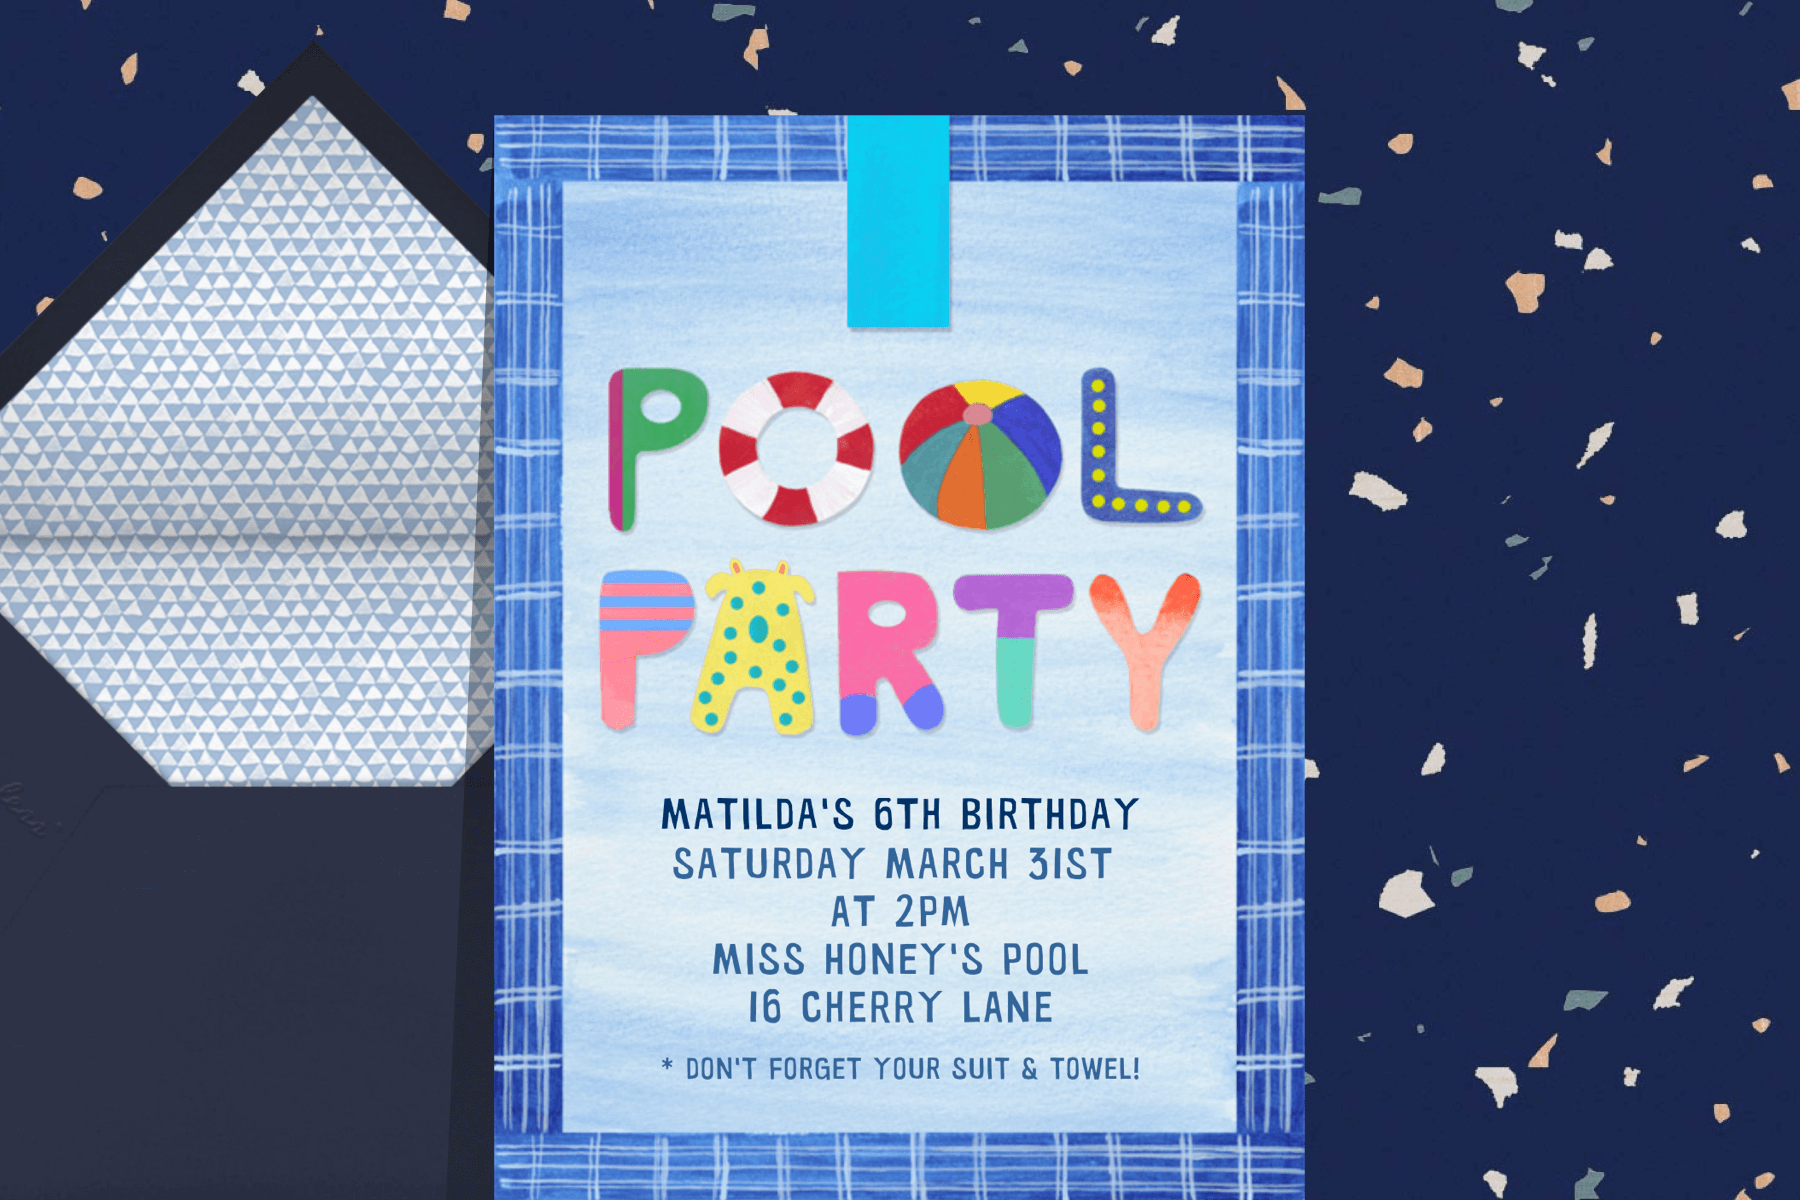 A kids’ birthday invitation with colorful dinosaurs with party hats and balloons.